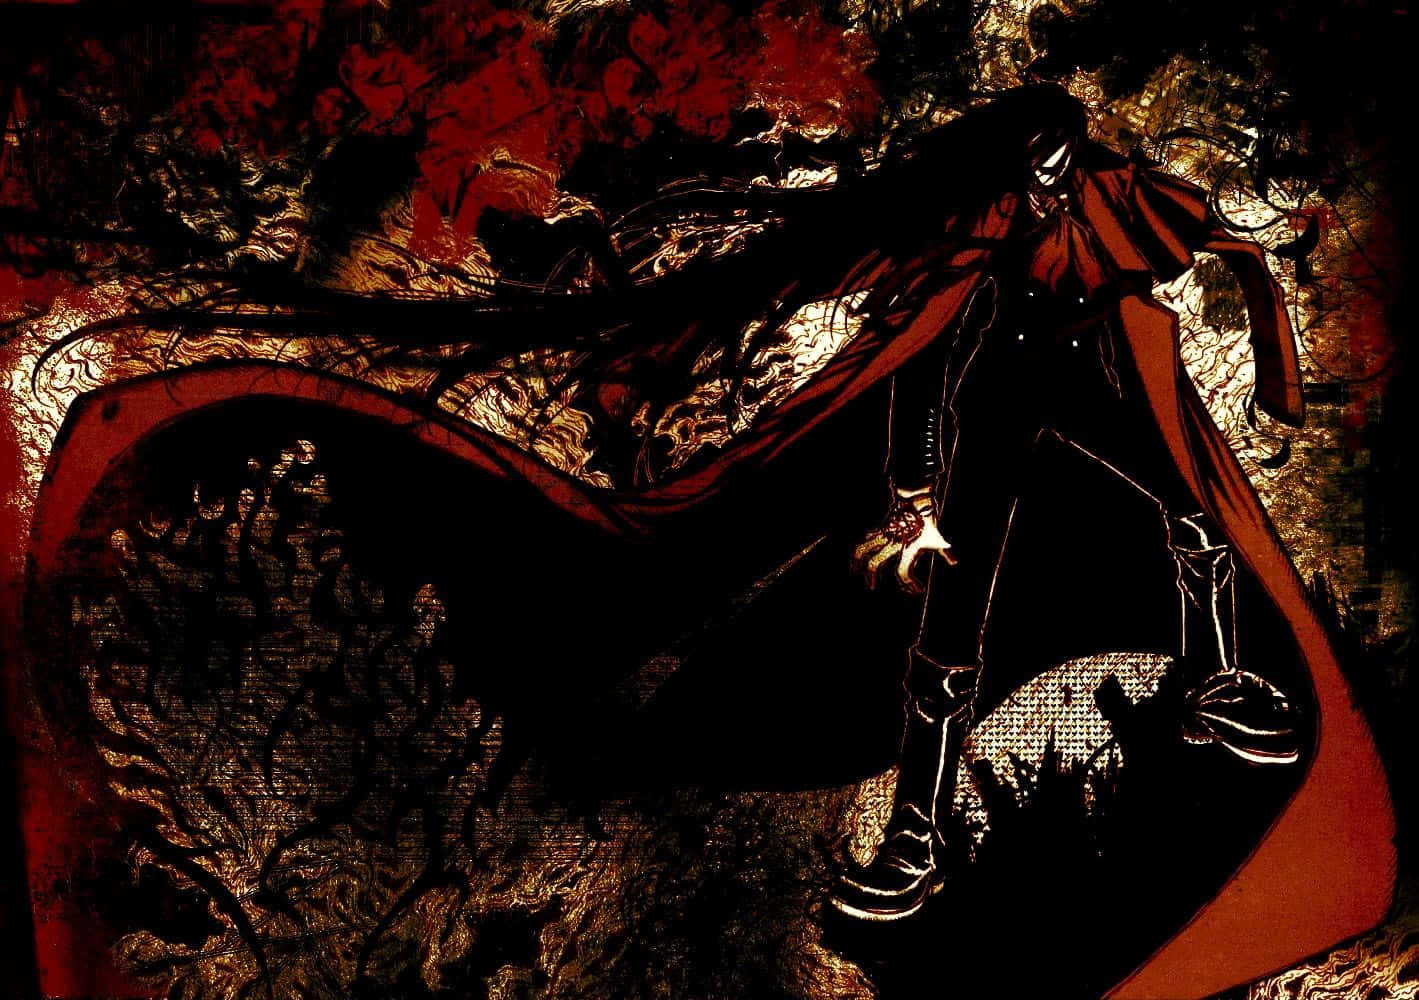 The Iconic Alucard From Hellsing Poised For Action Wallpaper